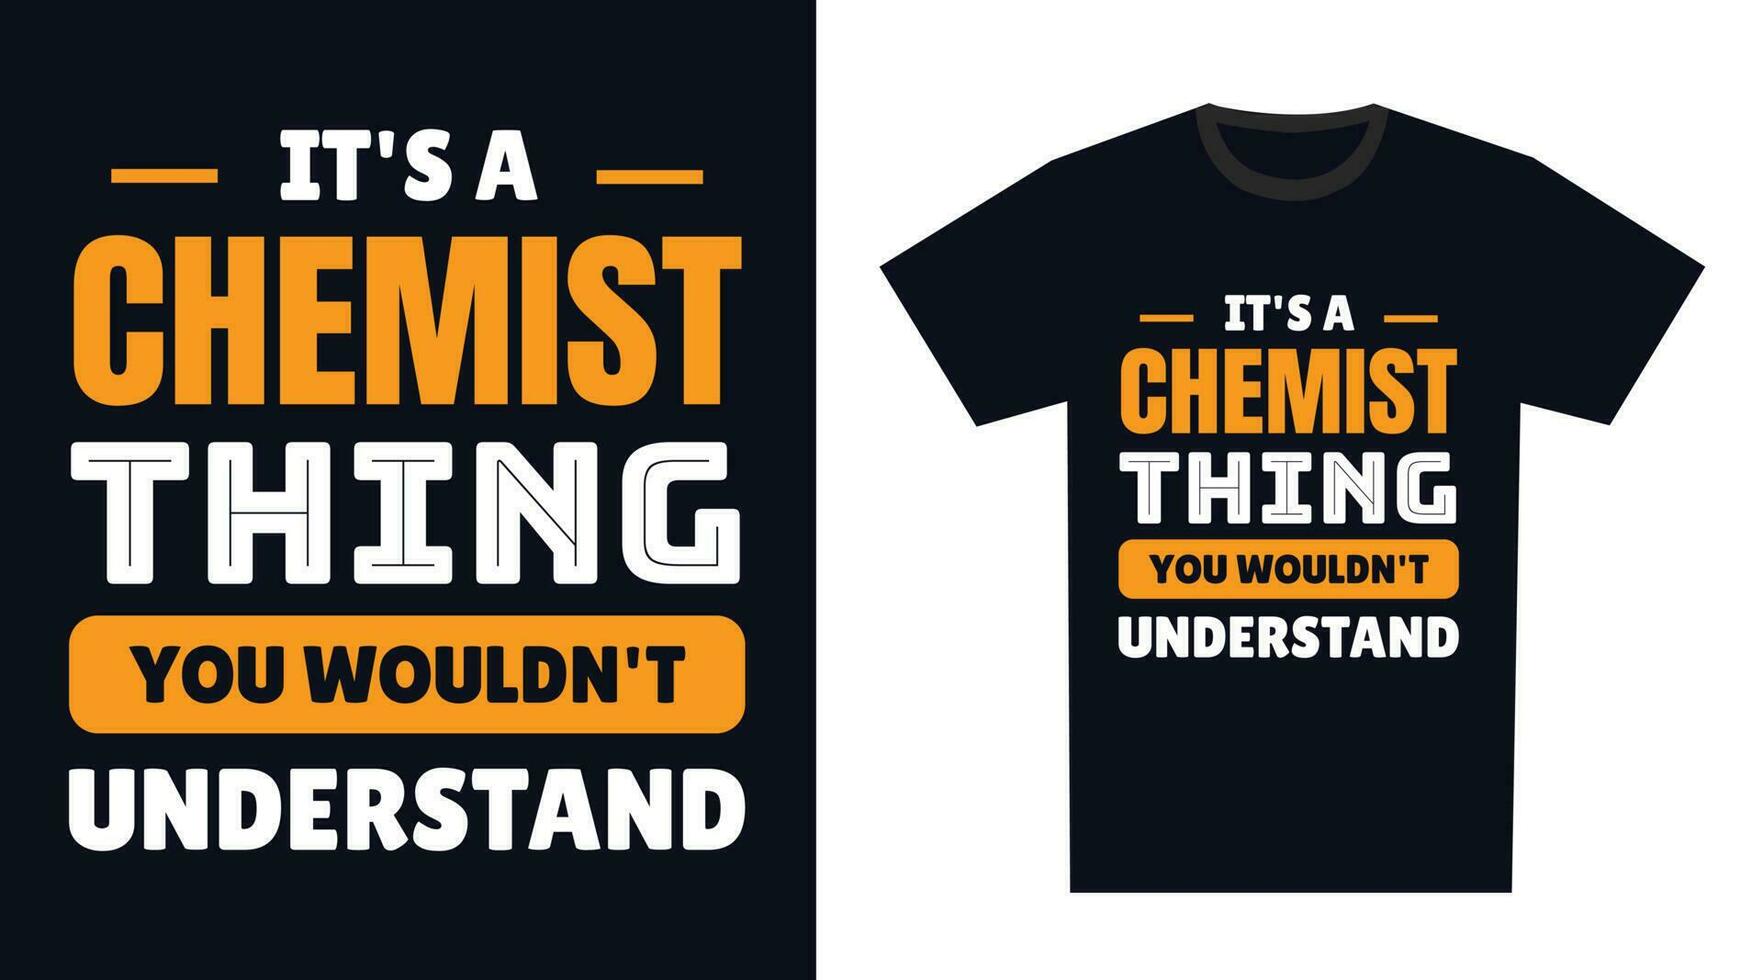 Chemist T Shirt Design. It's a Chemist Thing, You Wouldn't Understand vector